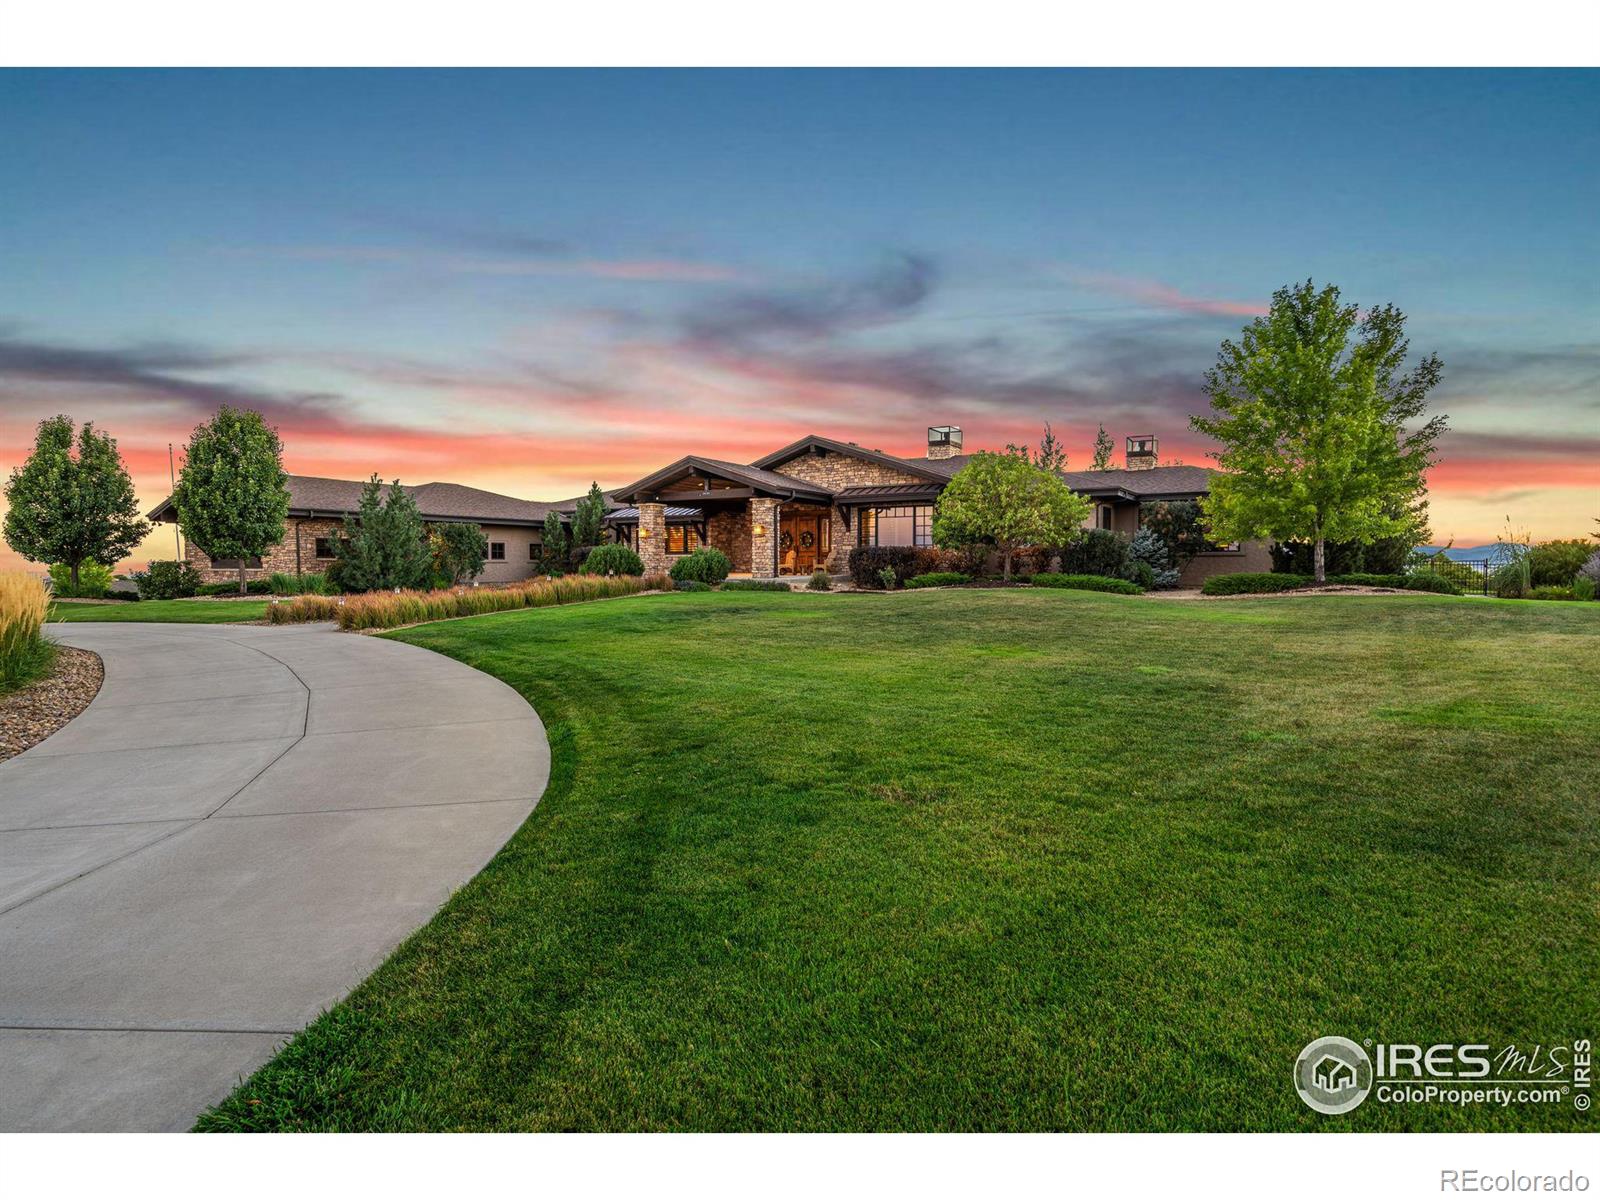 39759  pinnacle ridge court, severance sold home. Closed on 2024-04-26 for $3,600,000.